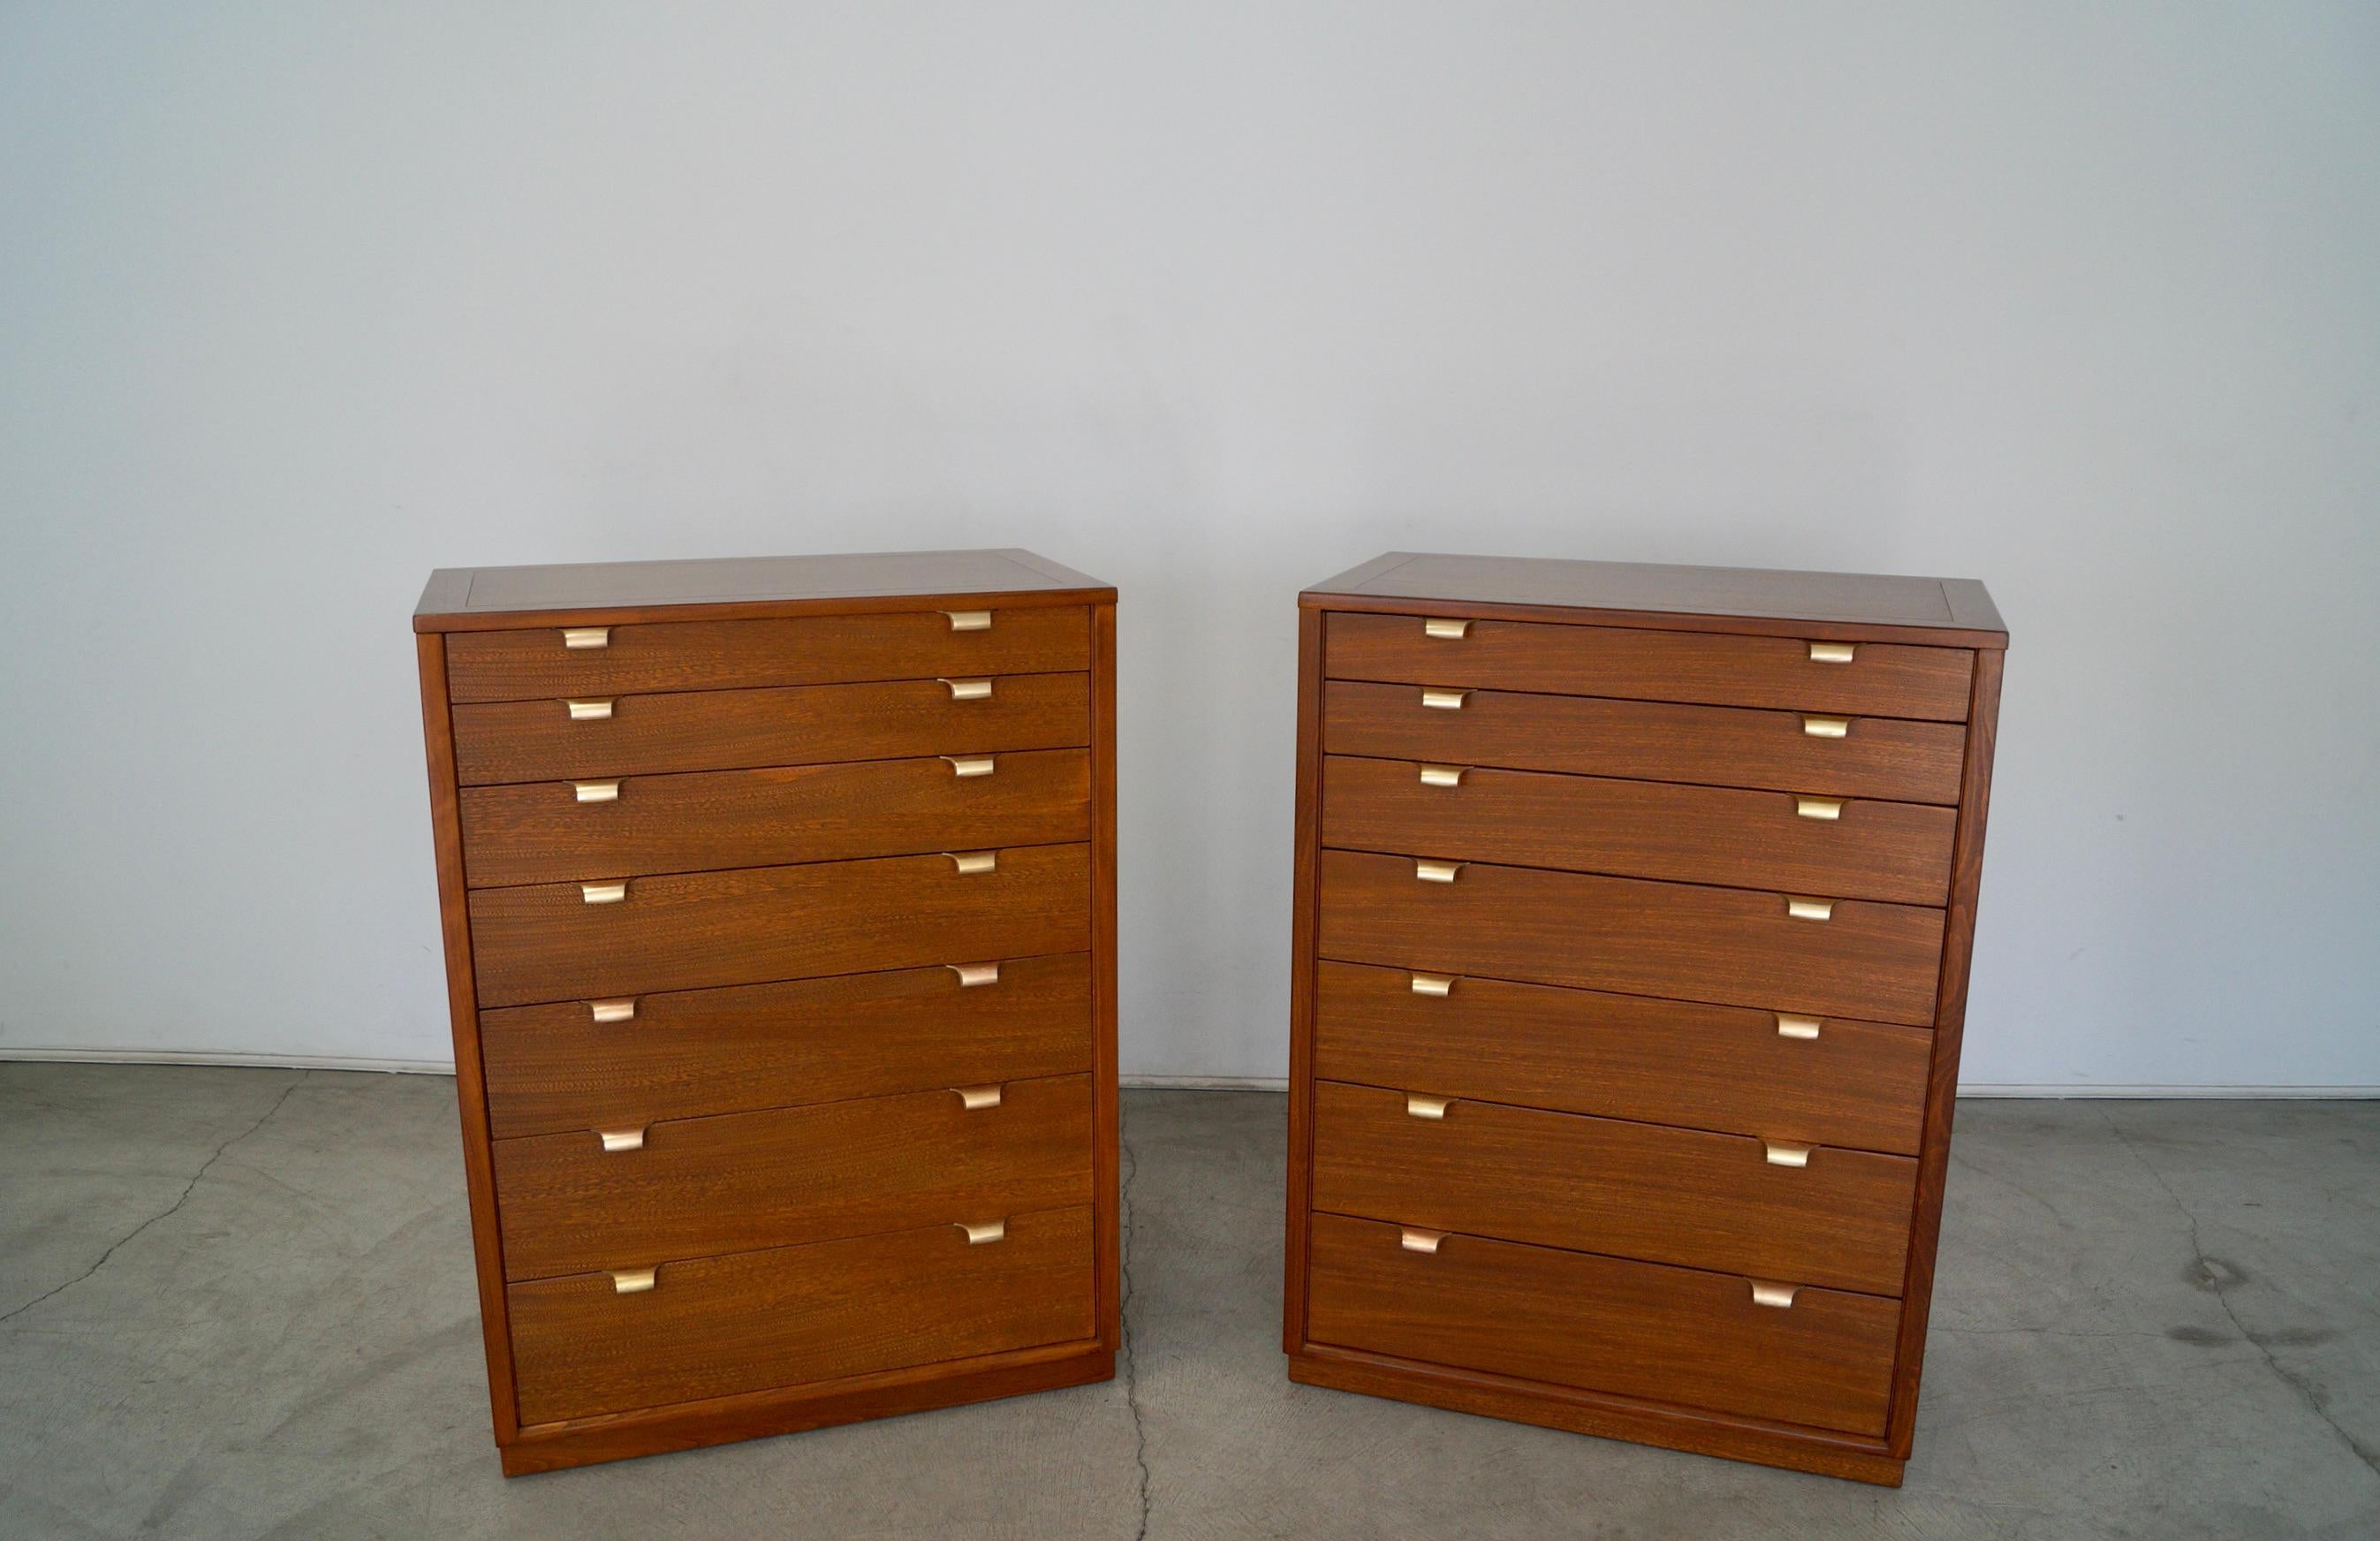 Stained 1940's Mid-Century Modern Edward Wormley Dressers, a Pair